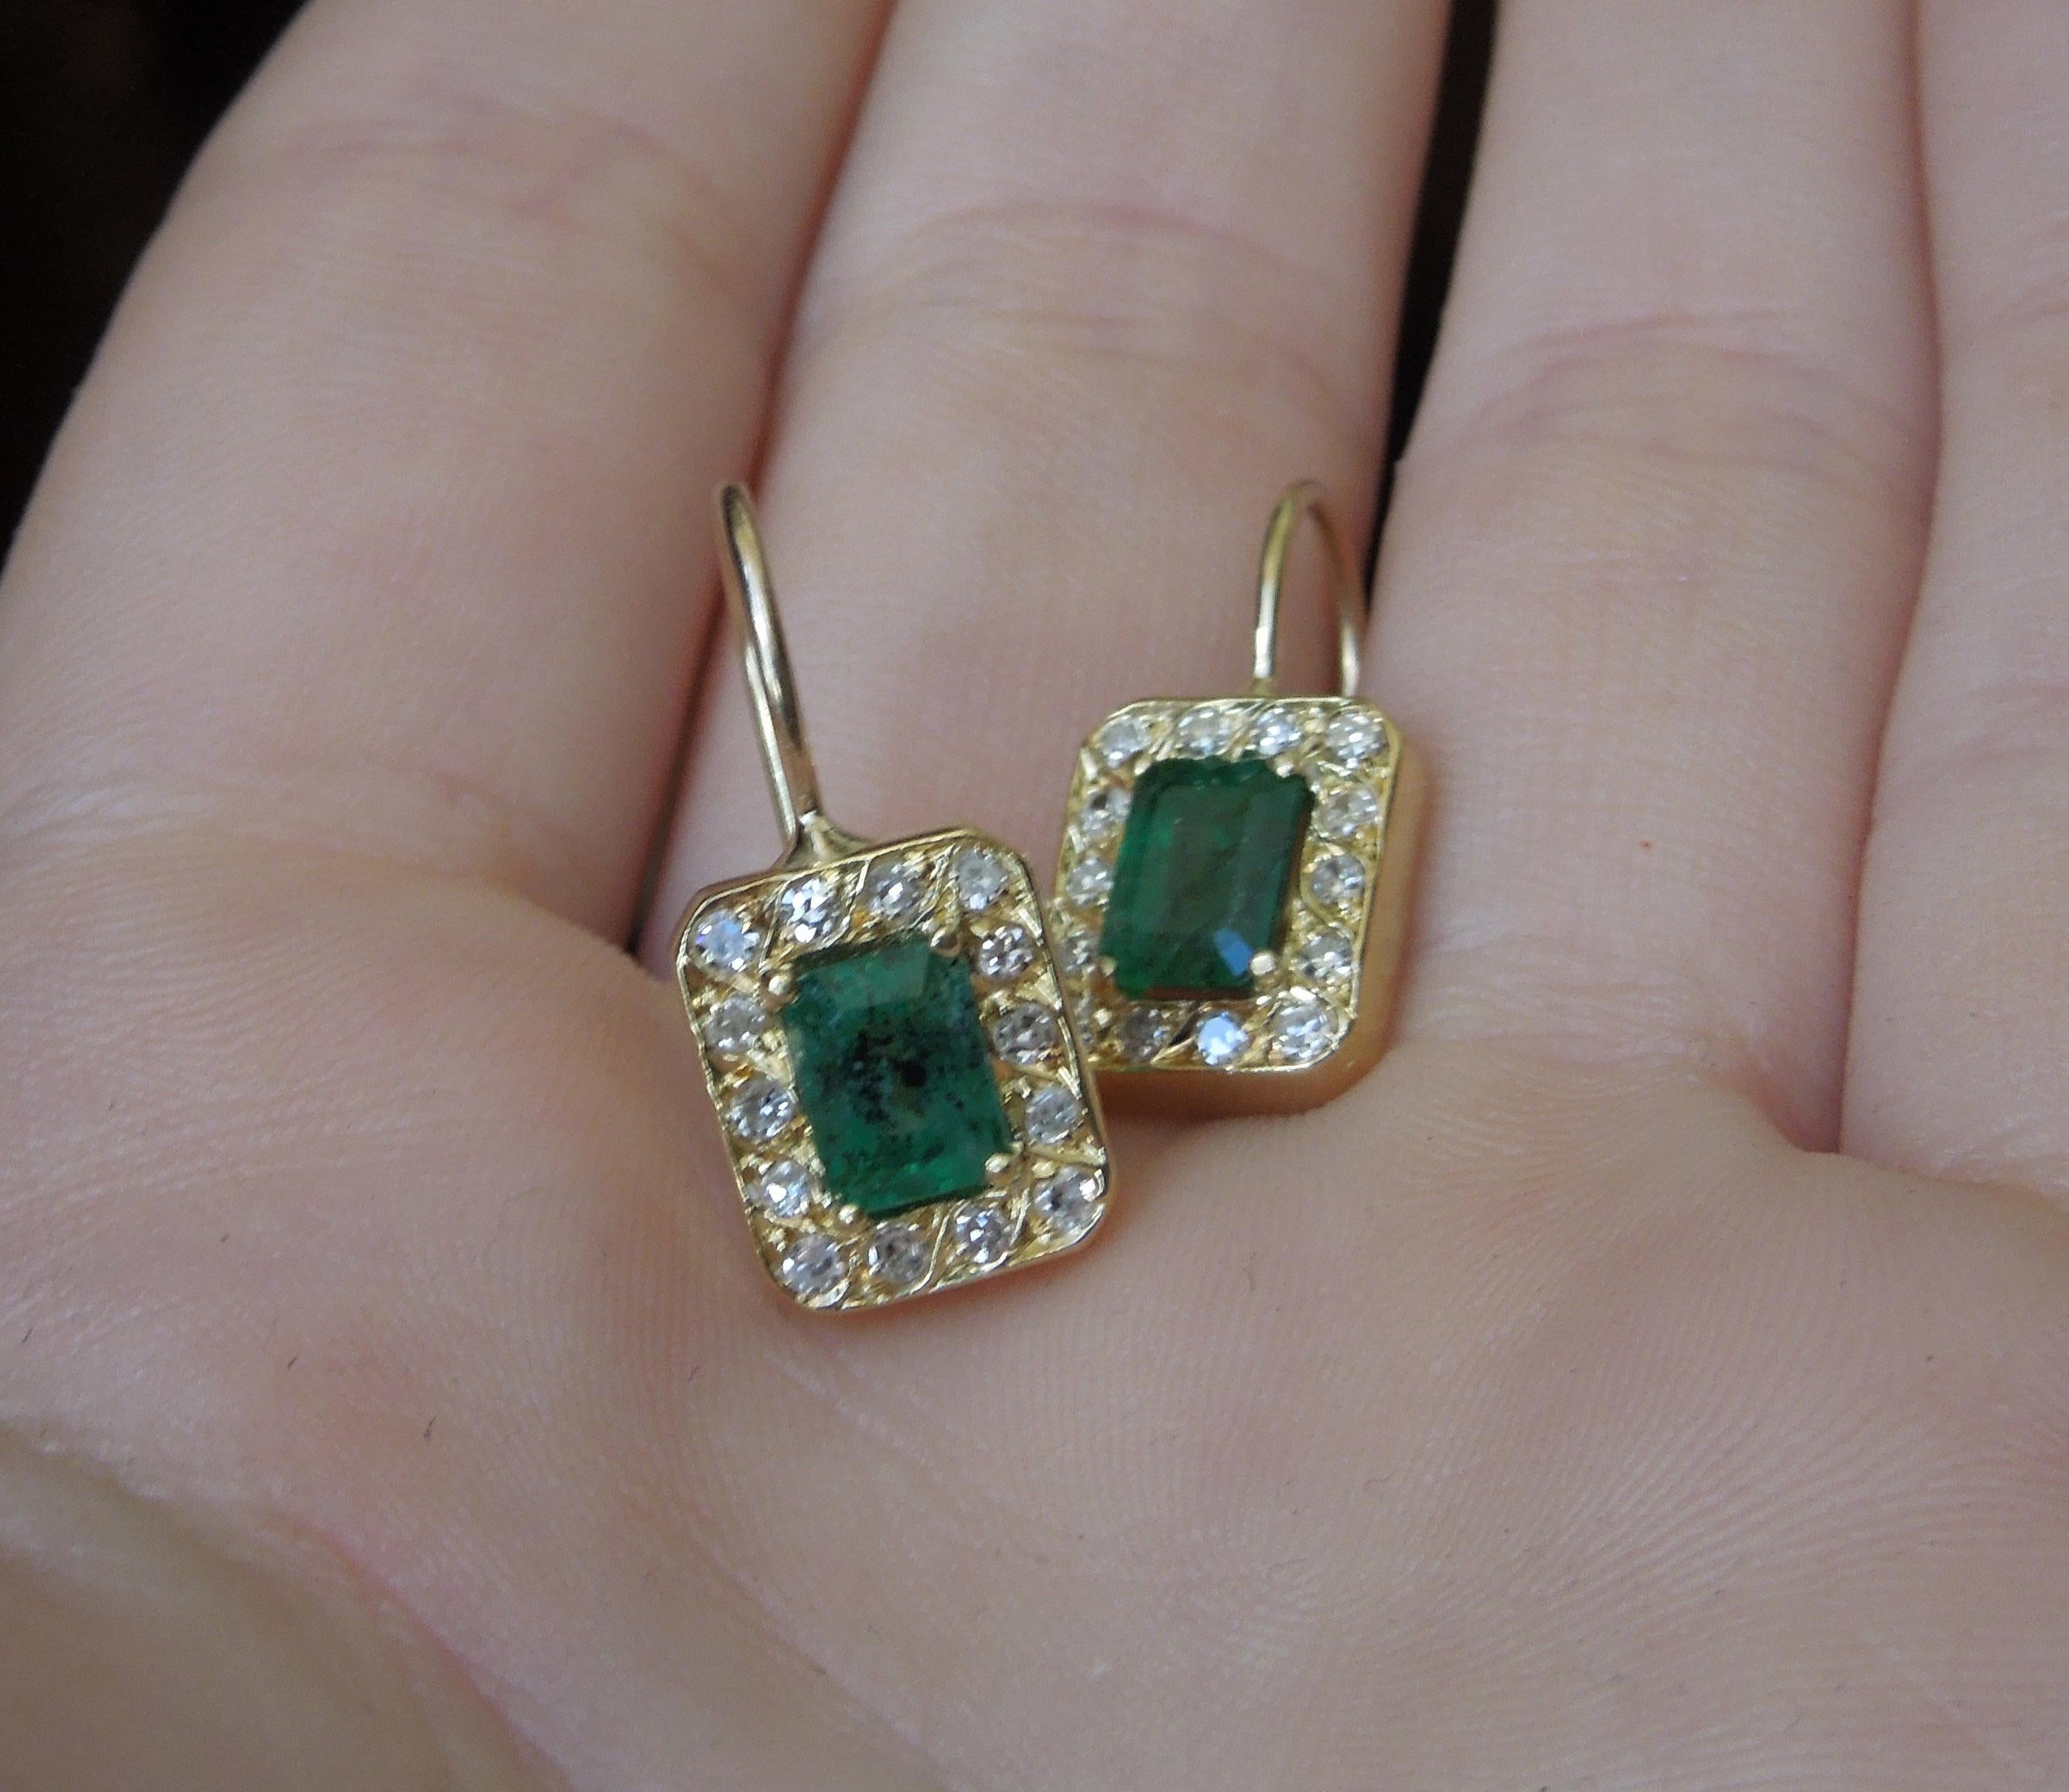 These 14 Karat Gold Emerald & Diamond Halo Earrings feature 2 Central Emerald cut Natural Intense Rich Green Emeralds totaling 2.03 carats. Slightly Opaque, with internal inclusions as well as few coming up to surface (a.k.a. Striation) - Refer to